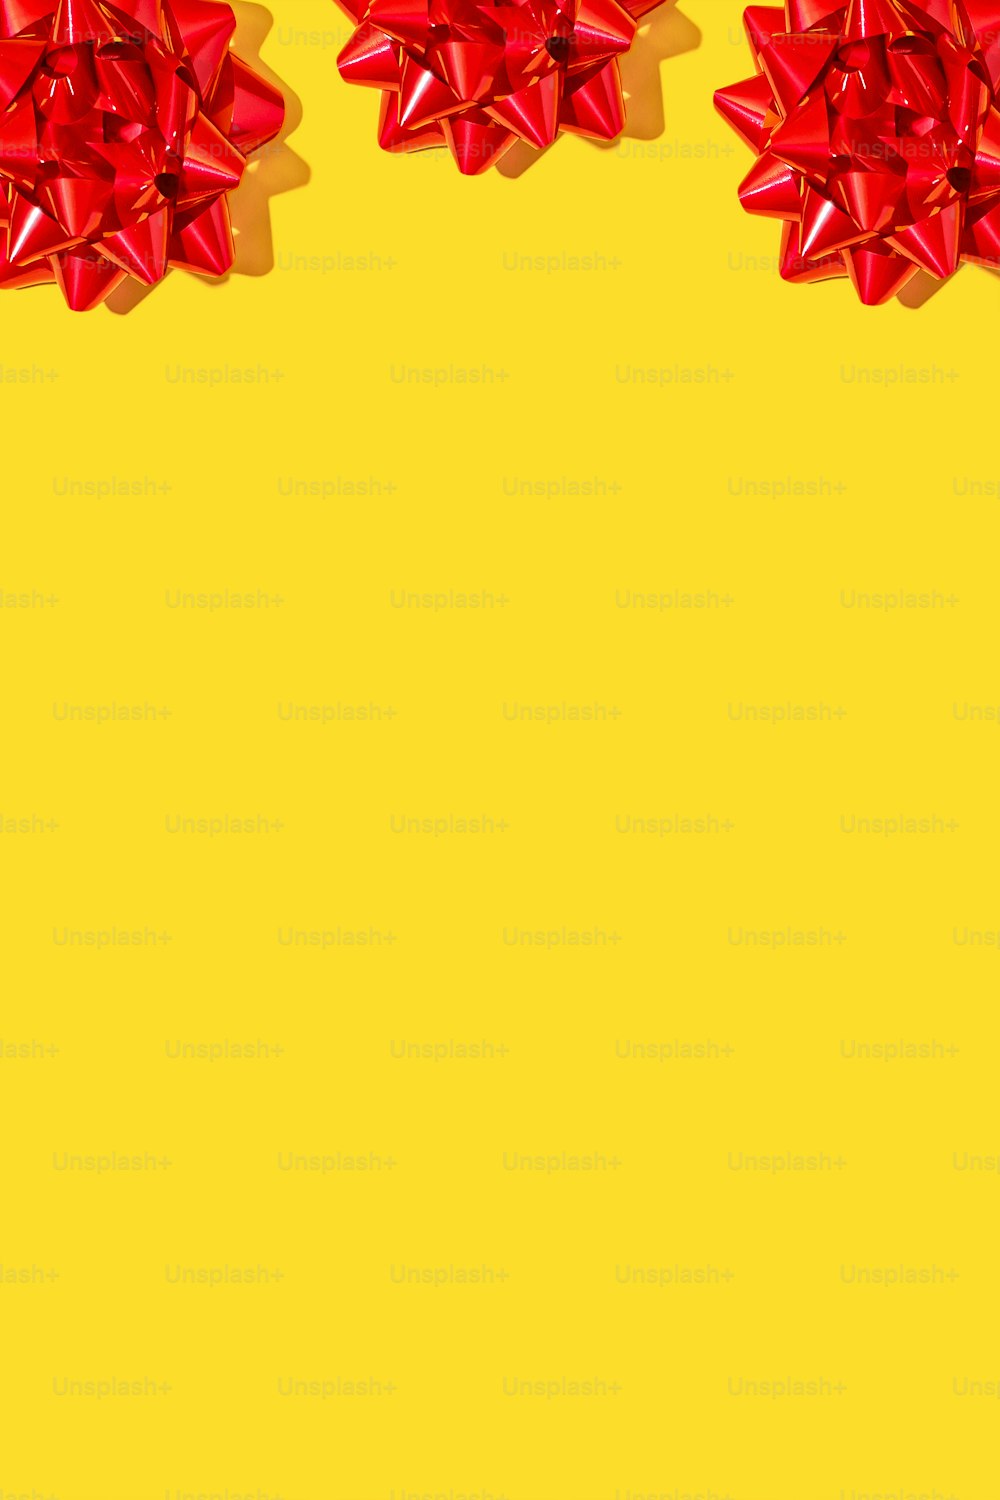 two red bows on a yellow background